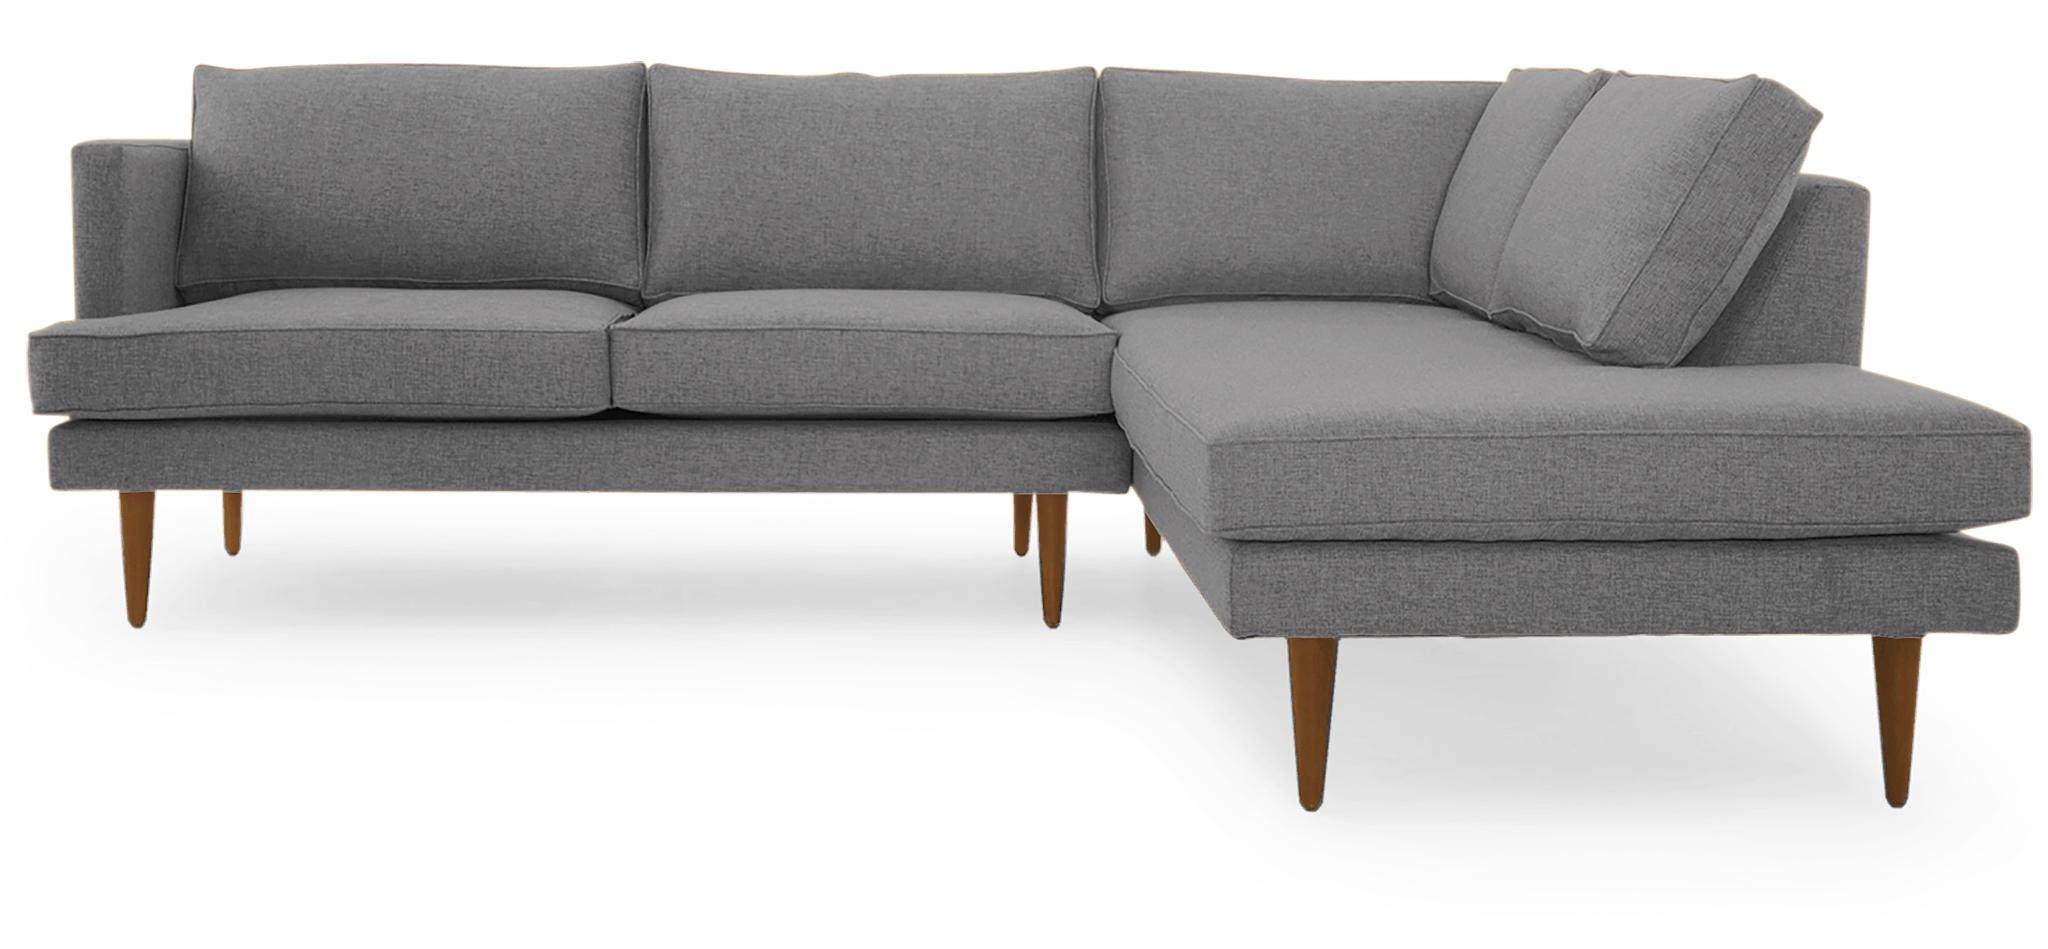 Gray Preston Mid Century Modern Sectional with Bumper (2 piece) - Royale Ash - Mocha - Right  - Image 0